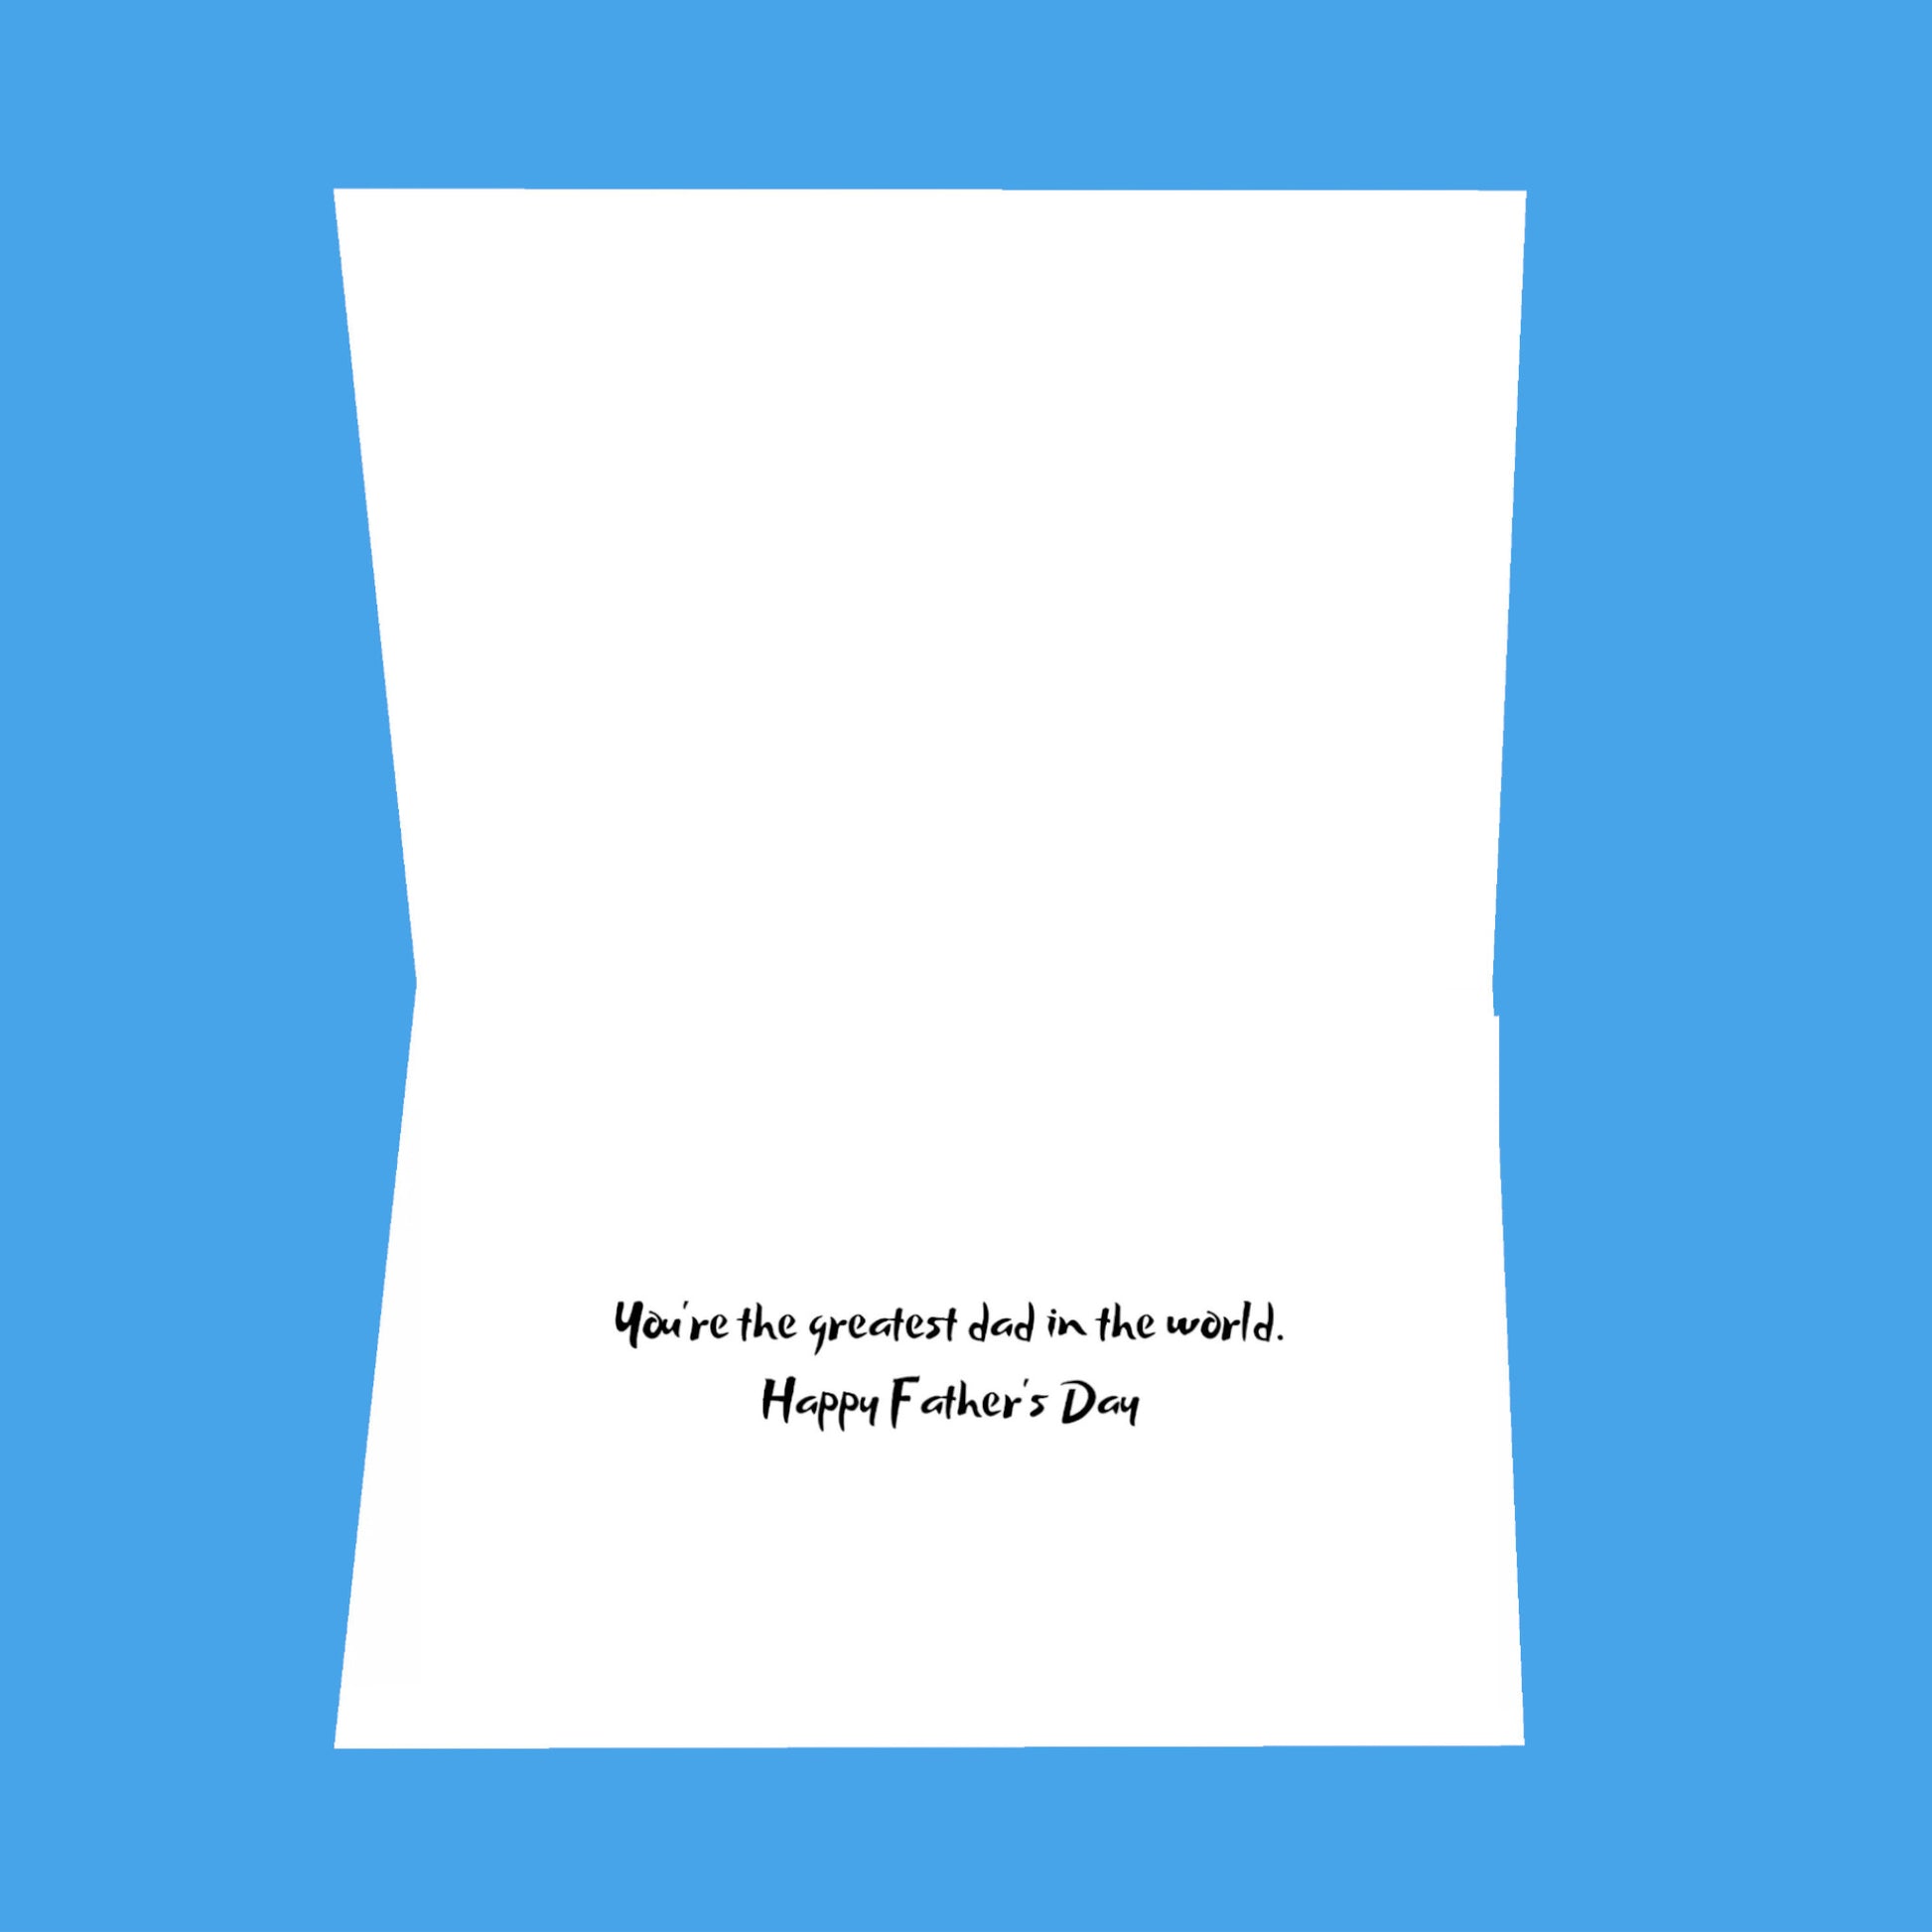 Dad, it's your special day... 8.5x5.5 Open Greeting Card